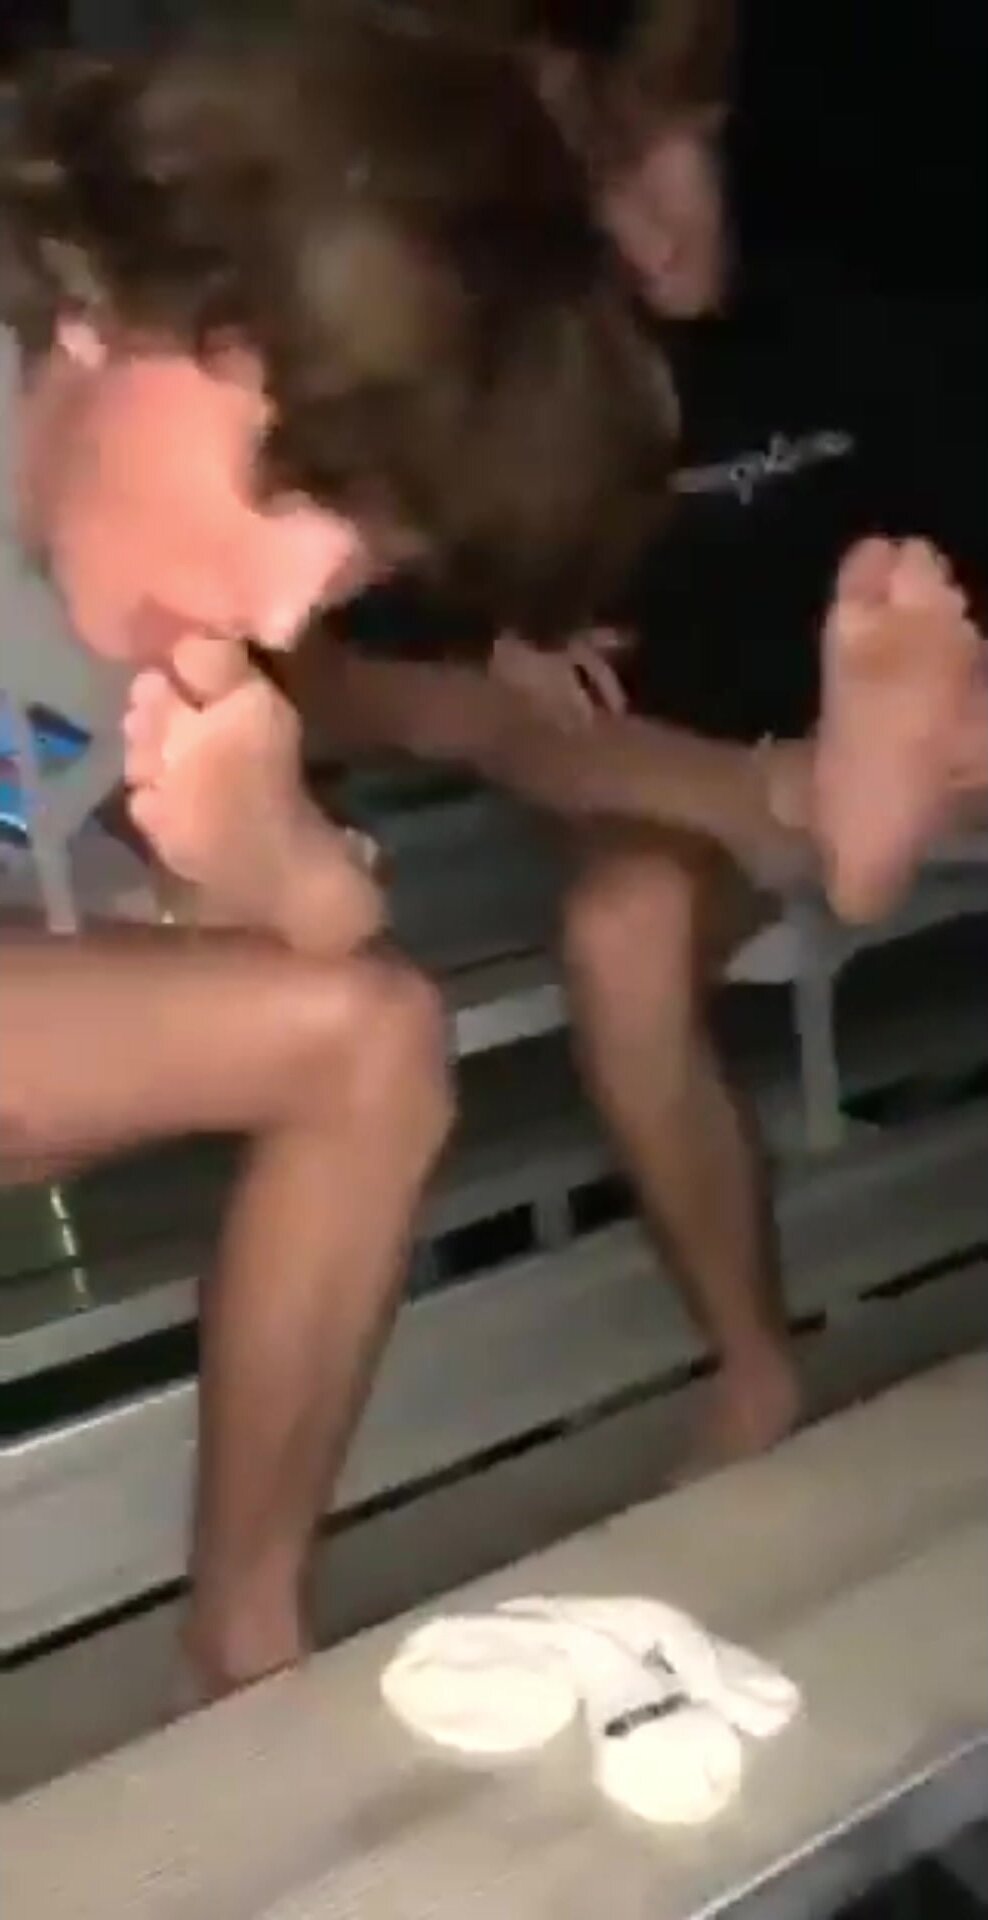 two white boys play with their homie’s feet